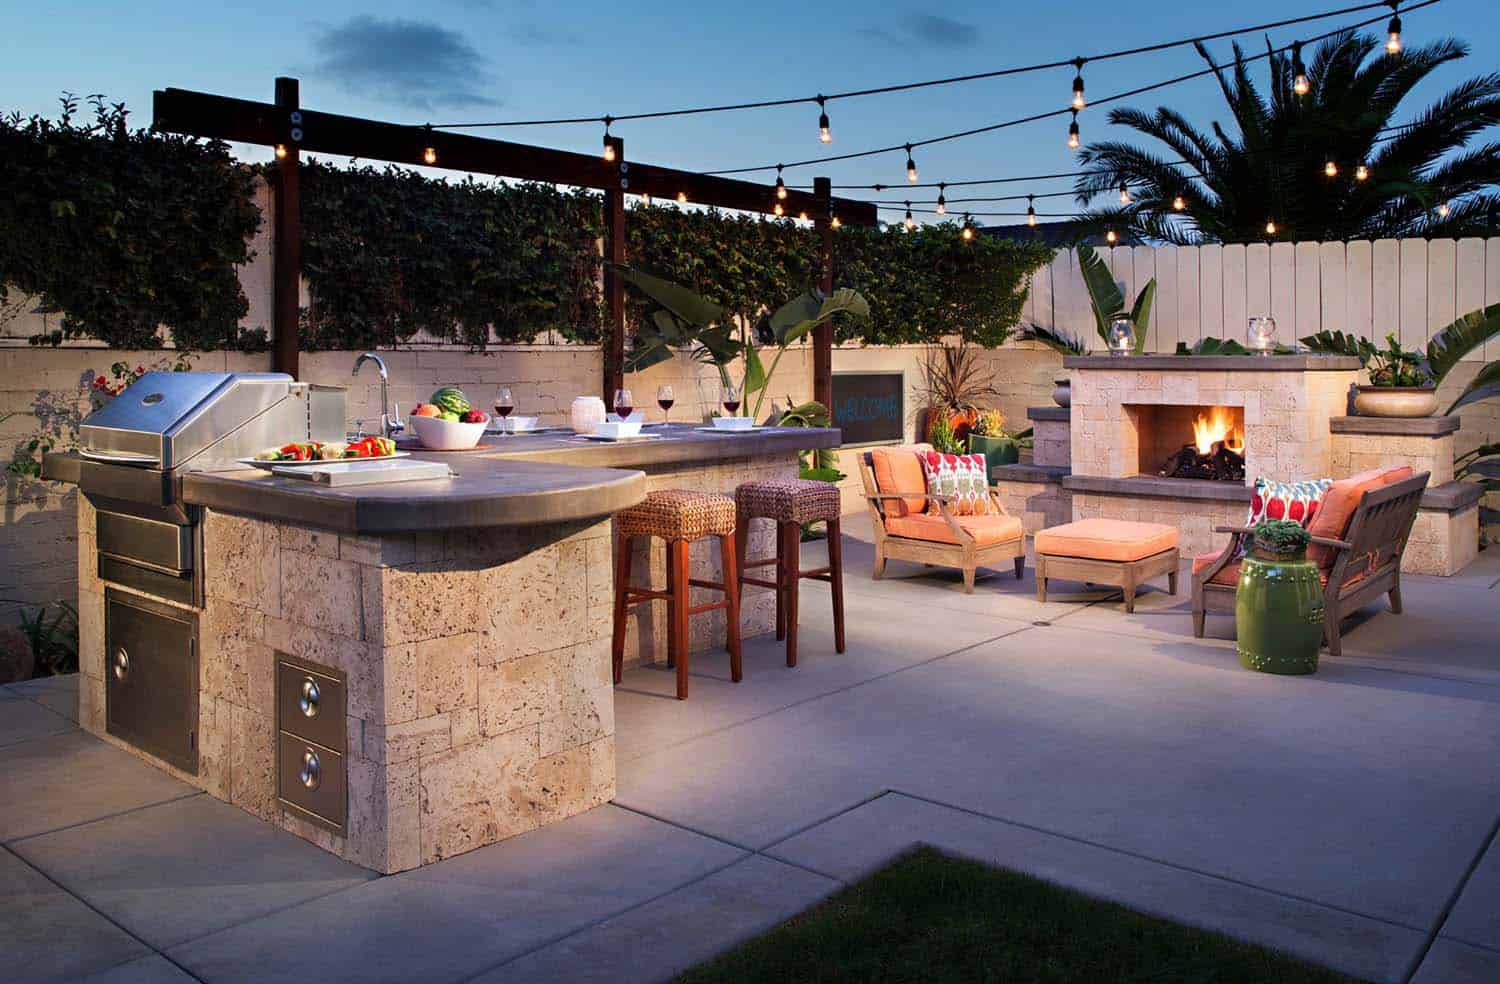 38 absolutely fantastic outdoor kitchen ideas for dining al fresco